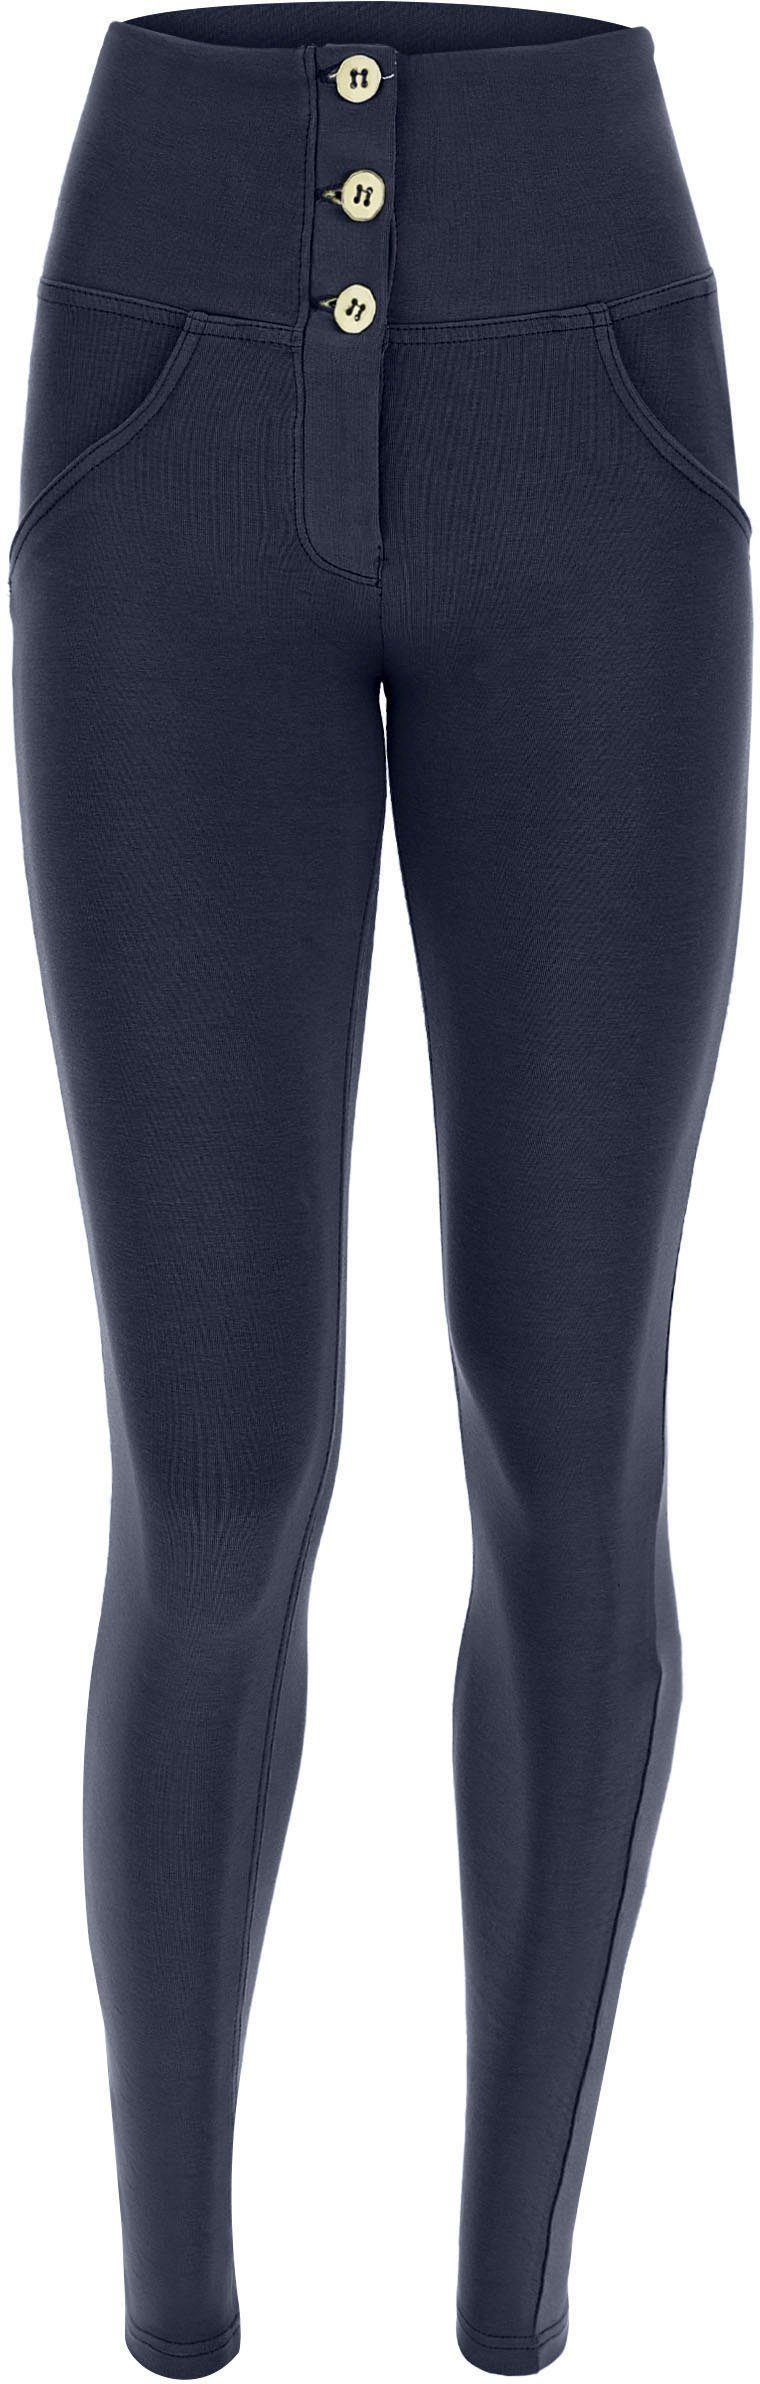 Freddy Jeggings WRUP2 SUPERSKINNY mit Lifting & Shaping Effekt, Jeggings  von Freddy | Jeggings